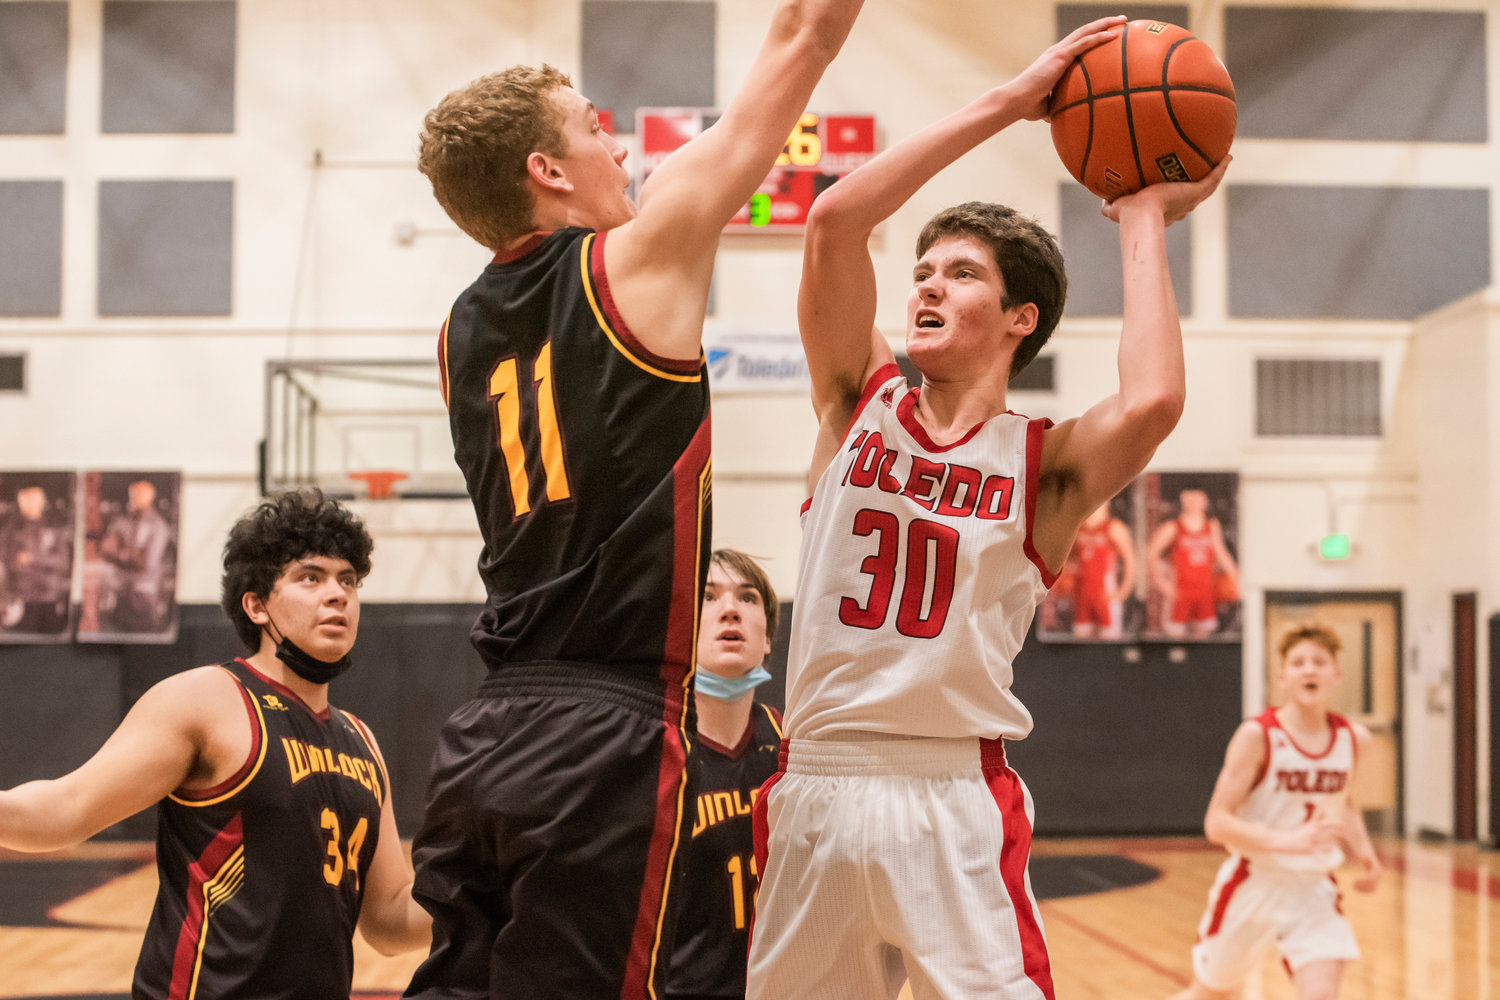 Toledo’s Kaven Winters (30) goes up with the ball during a game against Winlock Saturday night.